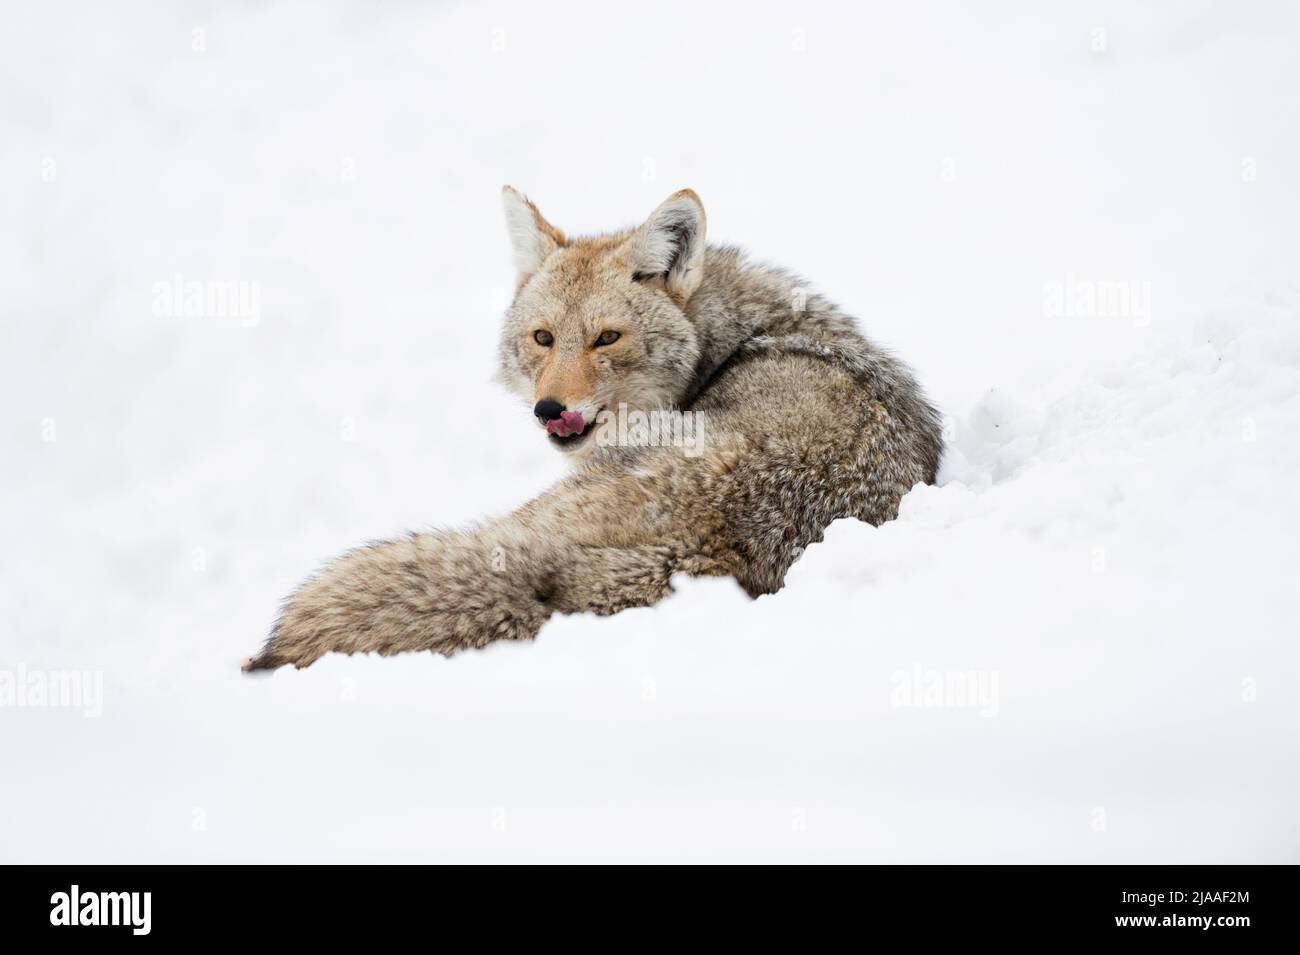 Coyote / Kojote ( Canis latrans ) in winter, lying in high snow, resting, licking its tongue, watching attentive, Yellowstone NP, USA. Stock Photo